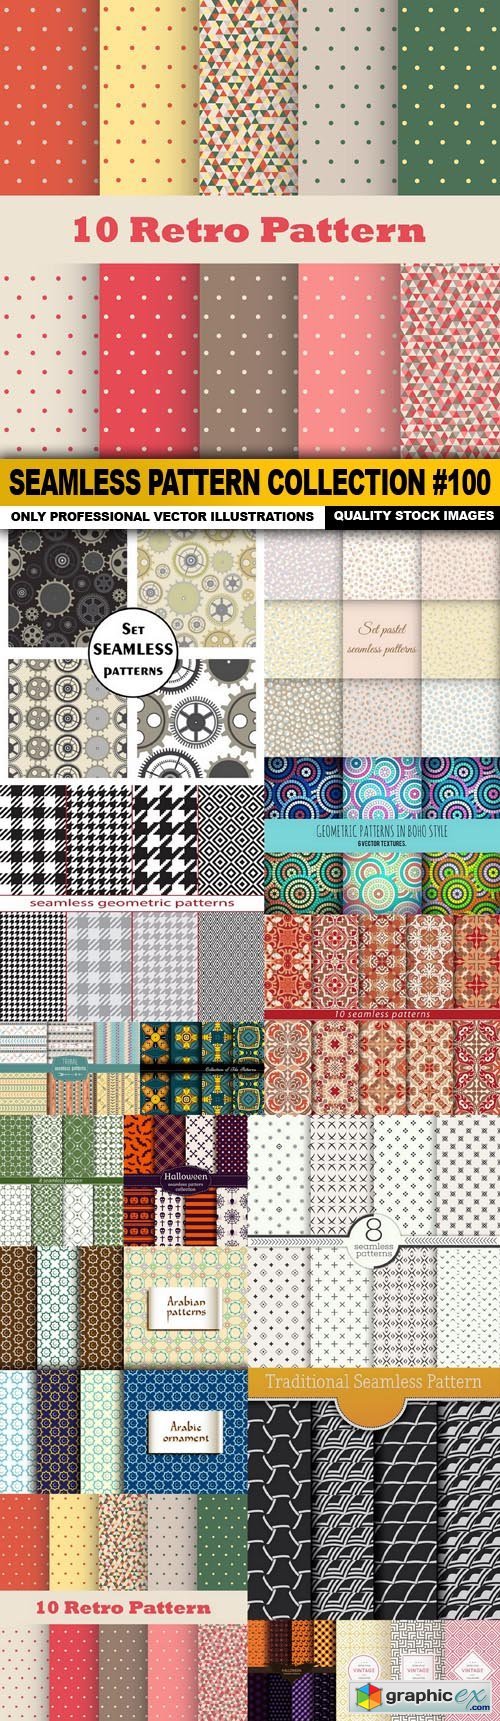 Seamless Pattern Collection #100